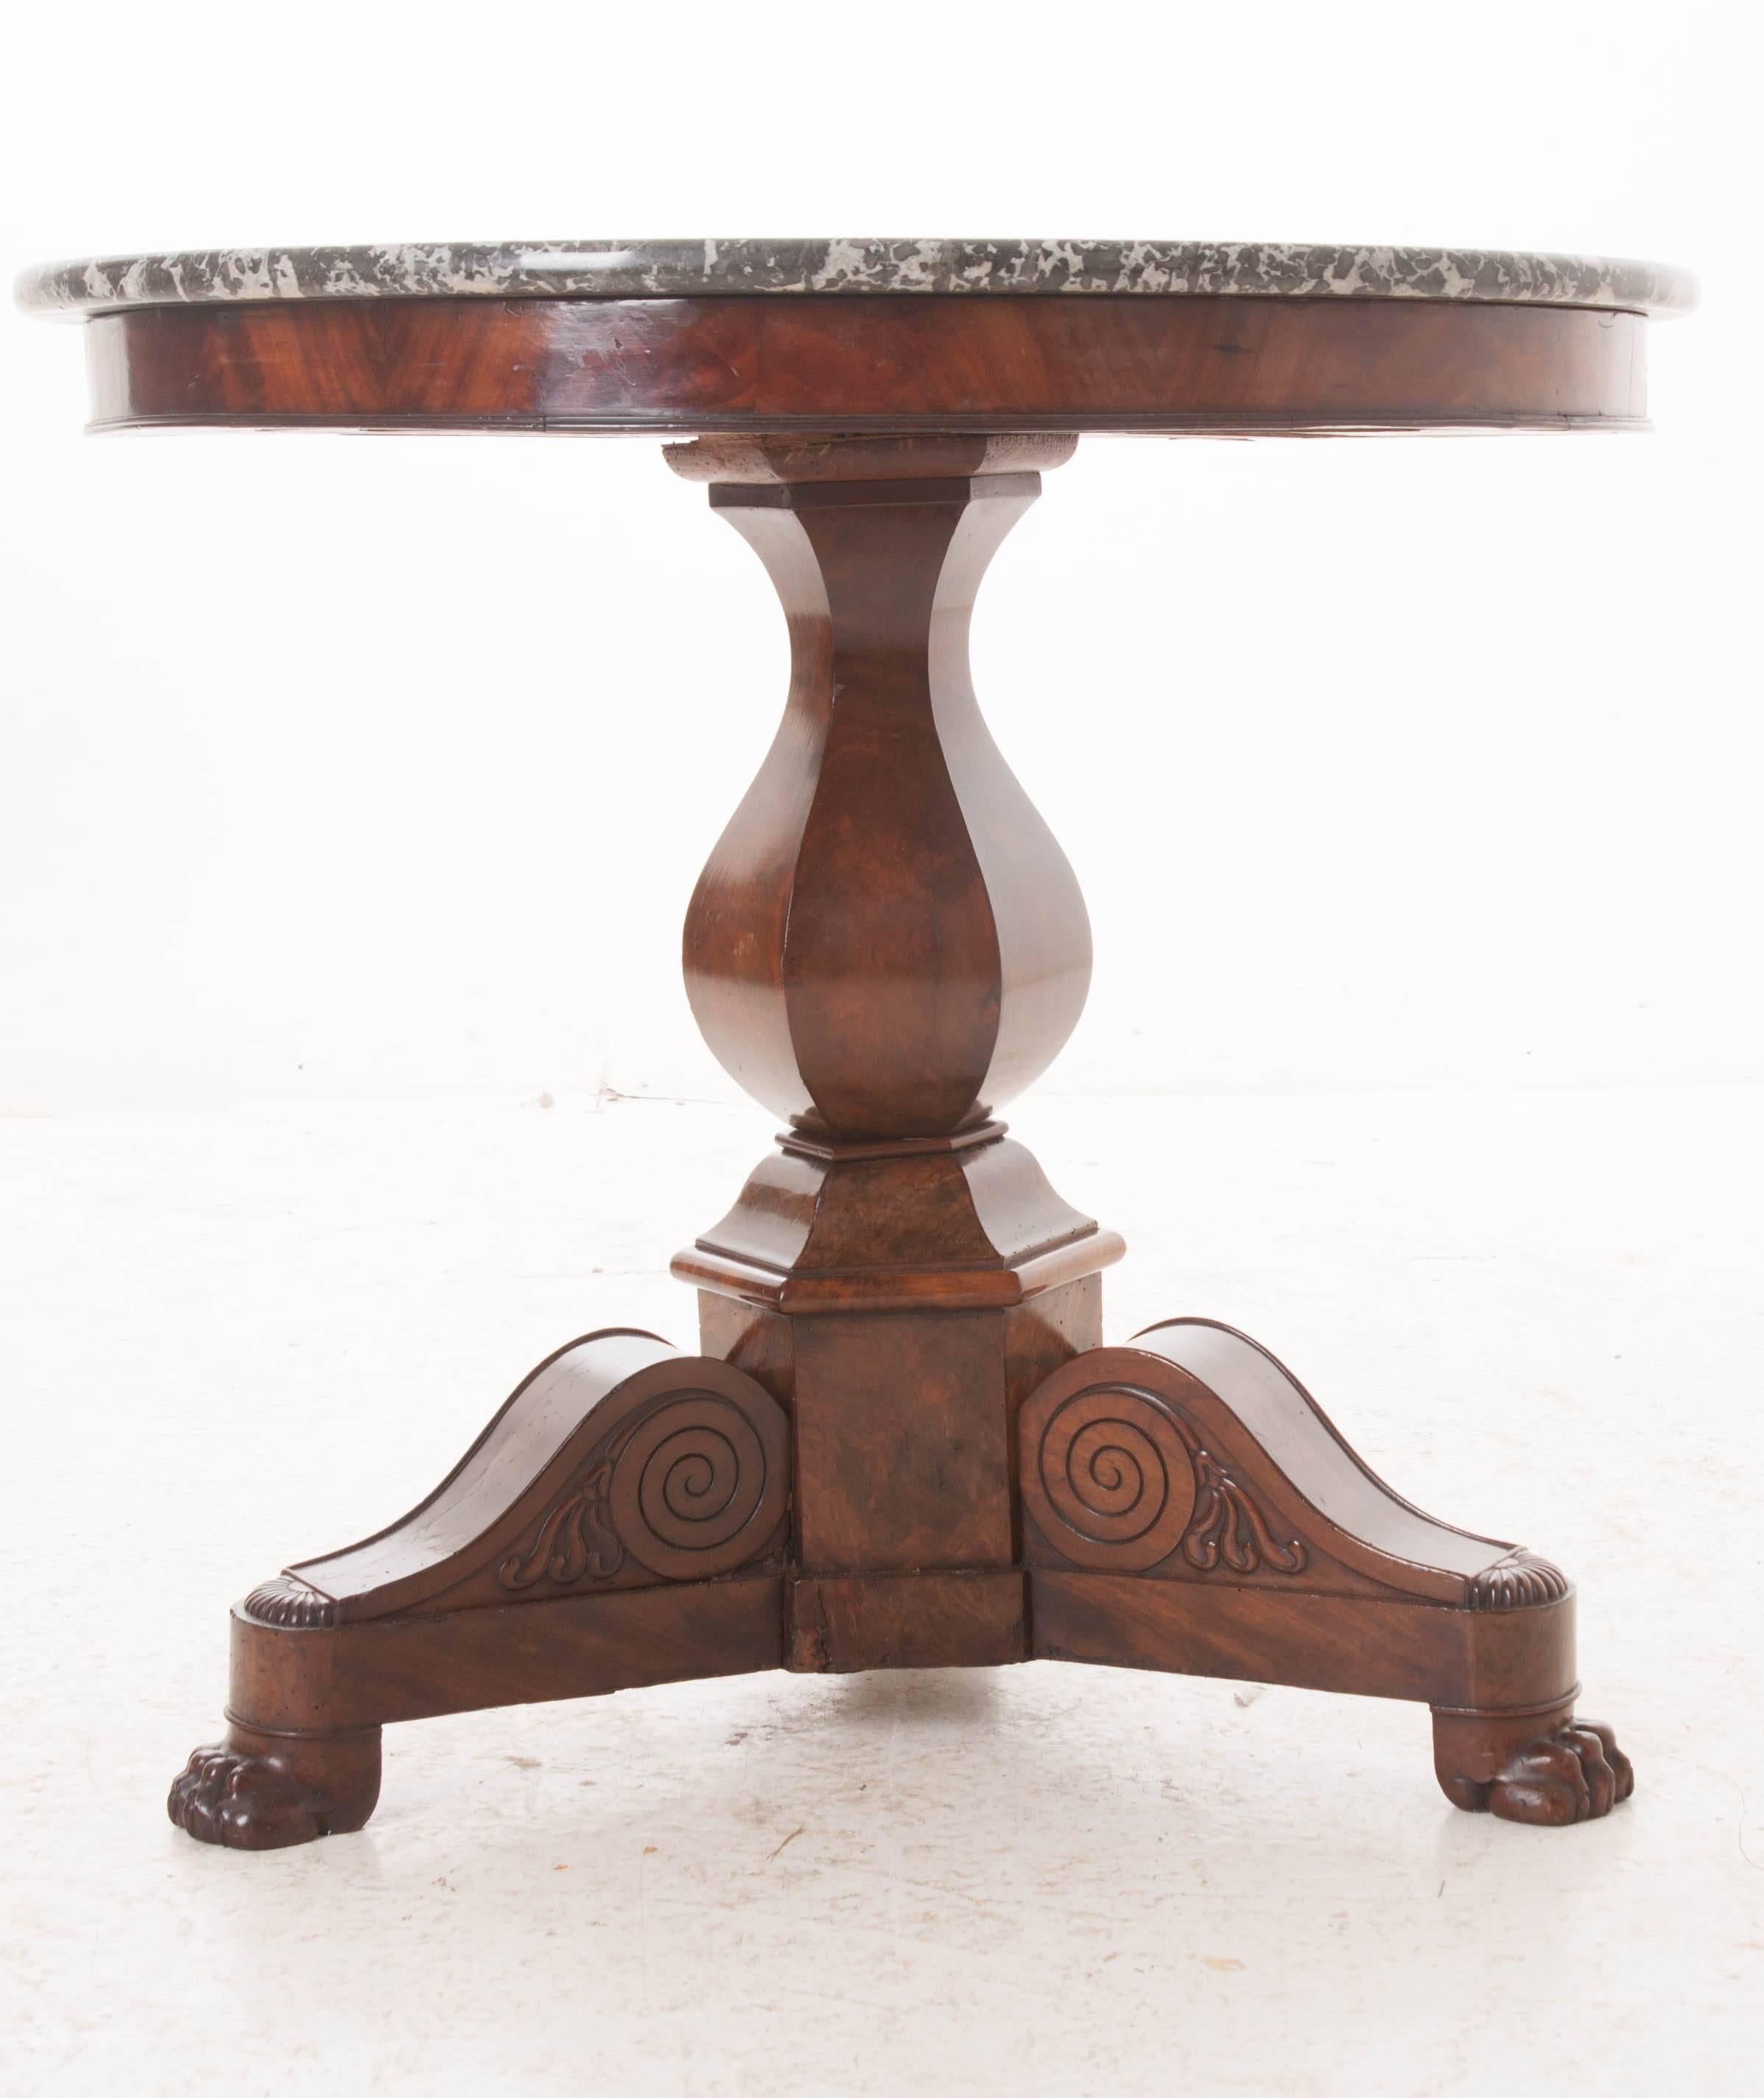 An outstanding French restauration mahogany center table with gray marble top. The marble-top is in excellent antique condition. The circular top rests on a mahogany tripod pedestal base with carved lion's paw feet. The base is embellished with